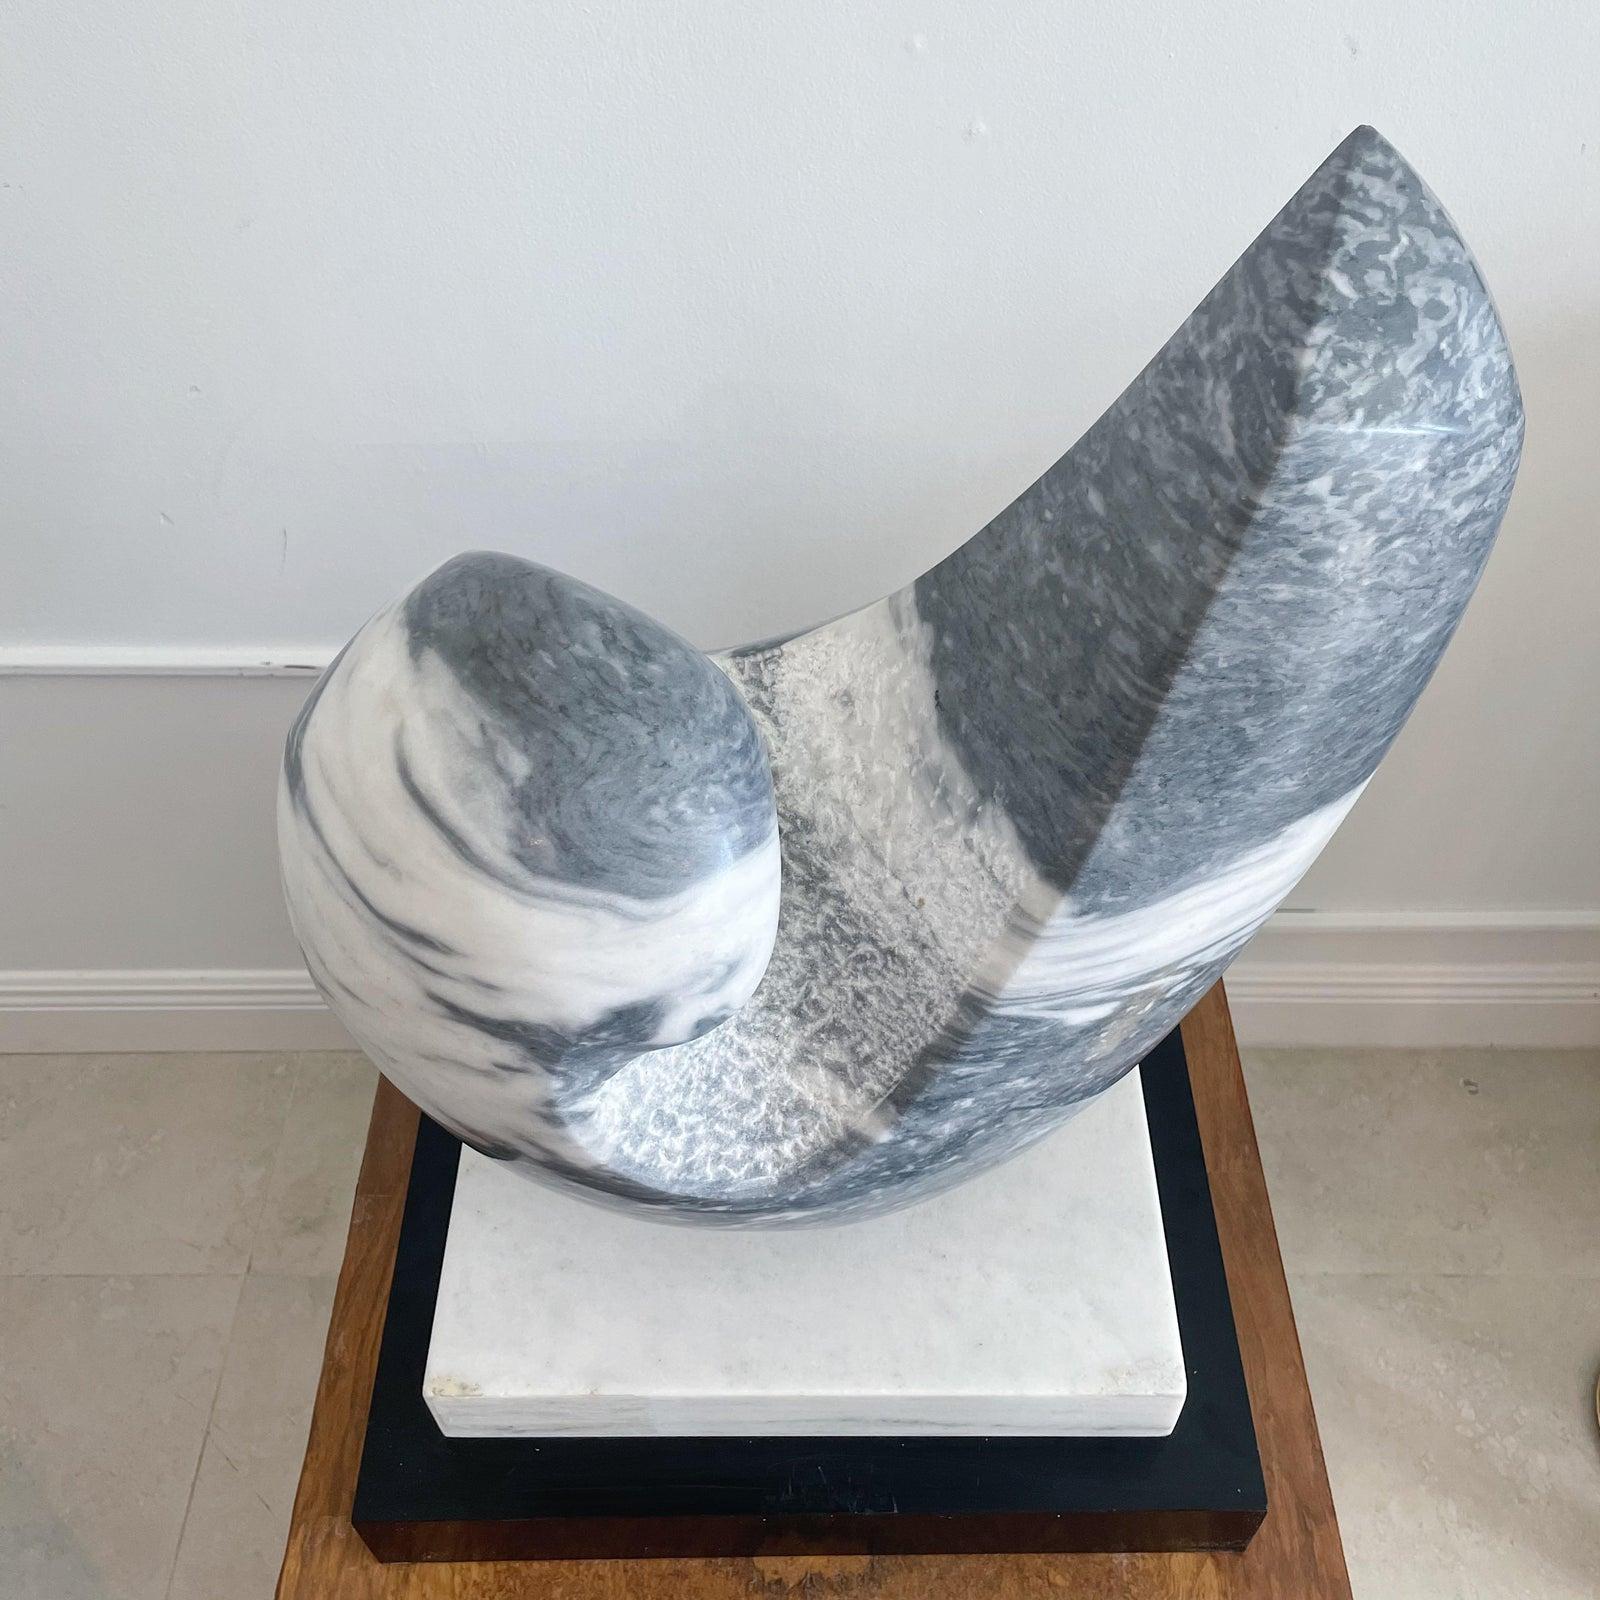 Hand carved large freeform abstract sculpture in white and grey hues. On black wood laminate covered base. Extremely heavy. Unsigned.